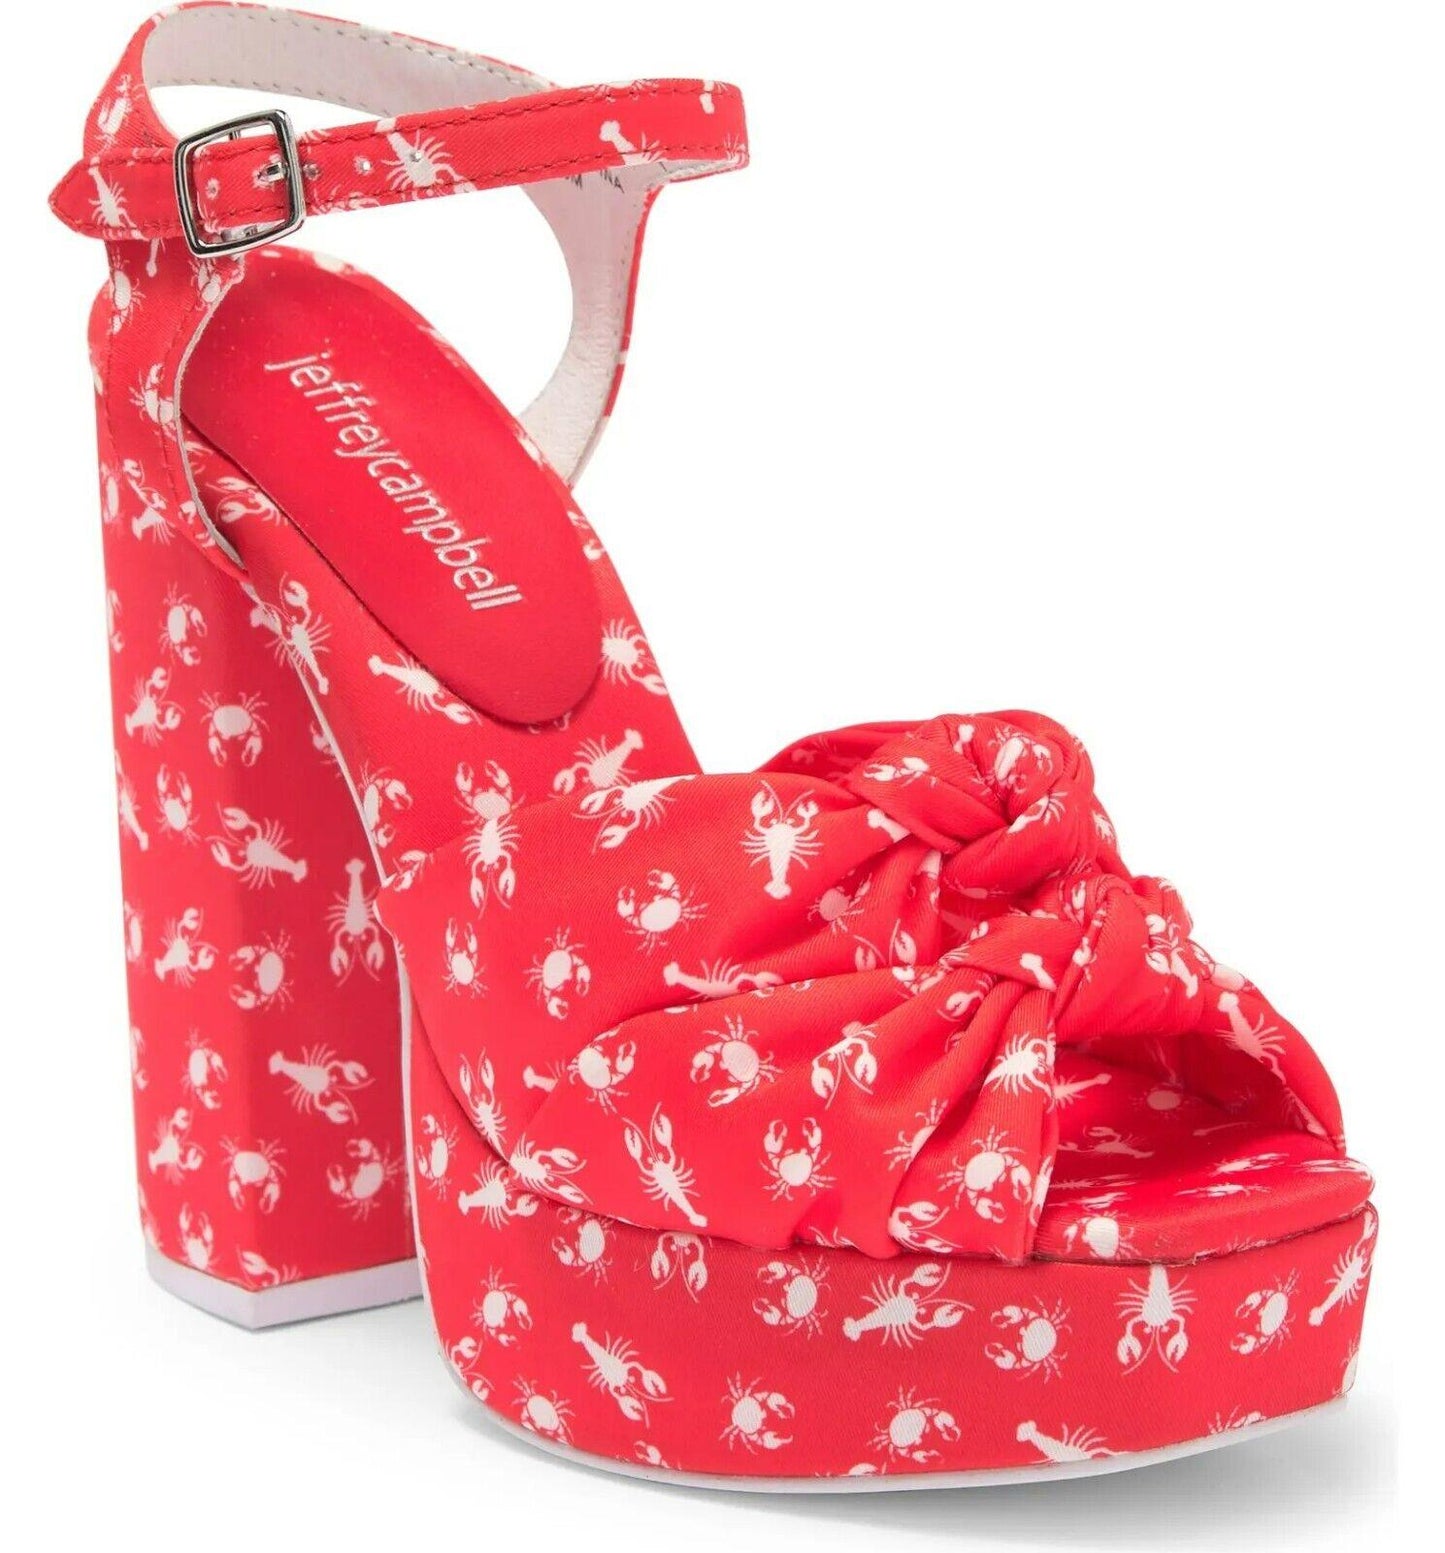 Jeffrey Campbell  Red Platform Sandal Lobsters and Crabs Print Knotted Straps Size US 8 - SVNYFancy